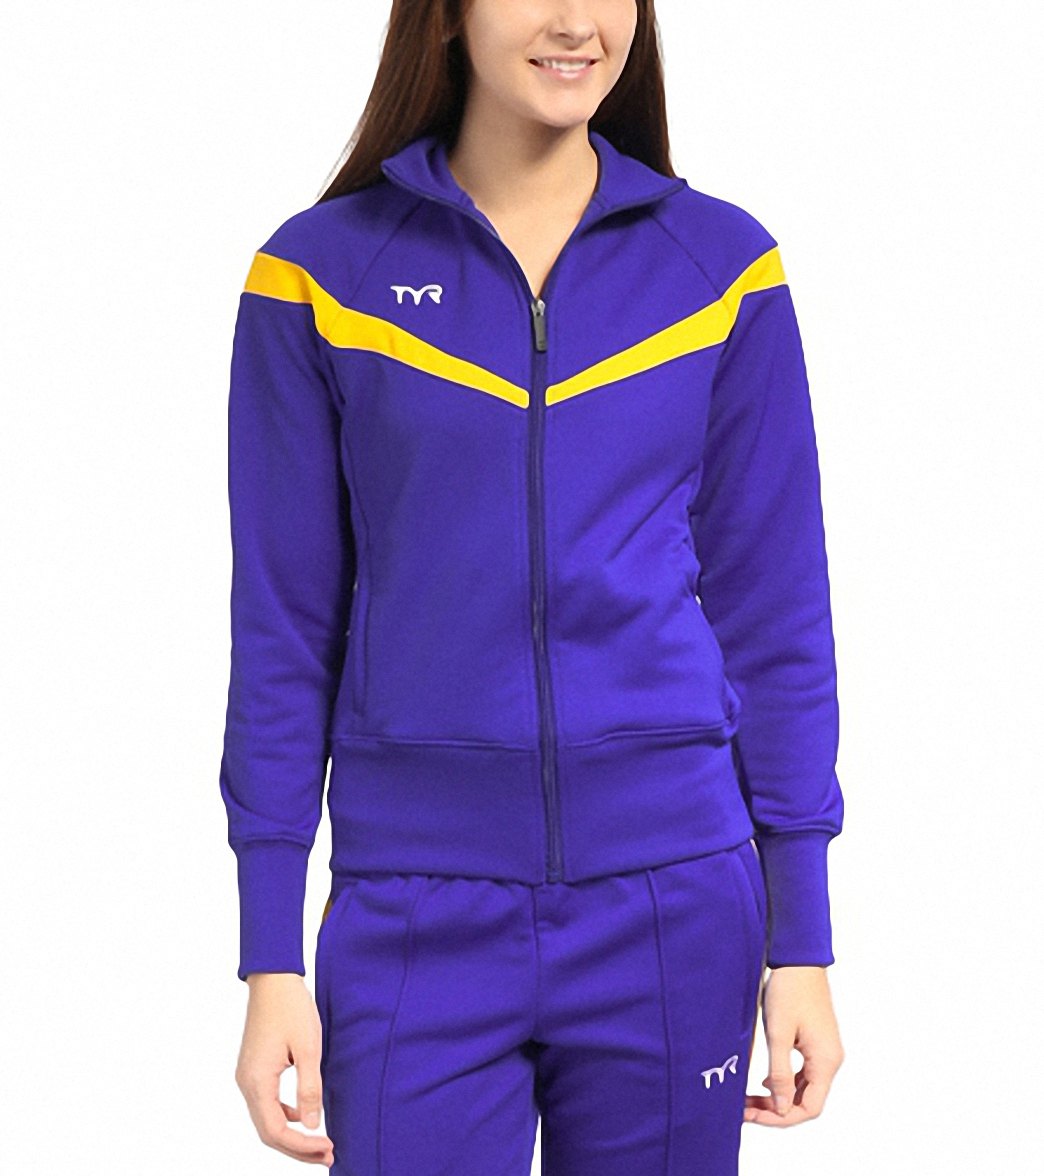 TYR Freestyle Female Warm Up Jacket - Royal/Gold Large Polyester - Swimoutlet.com